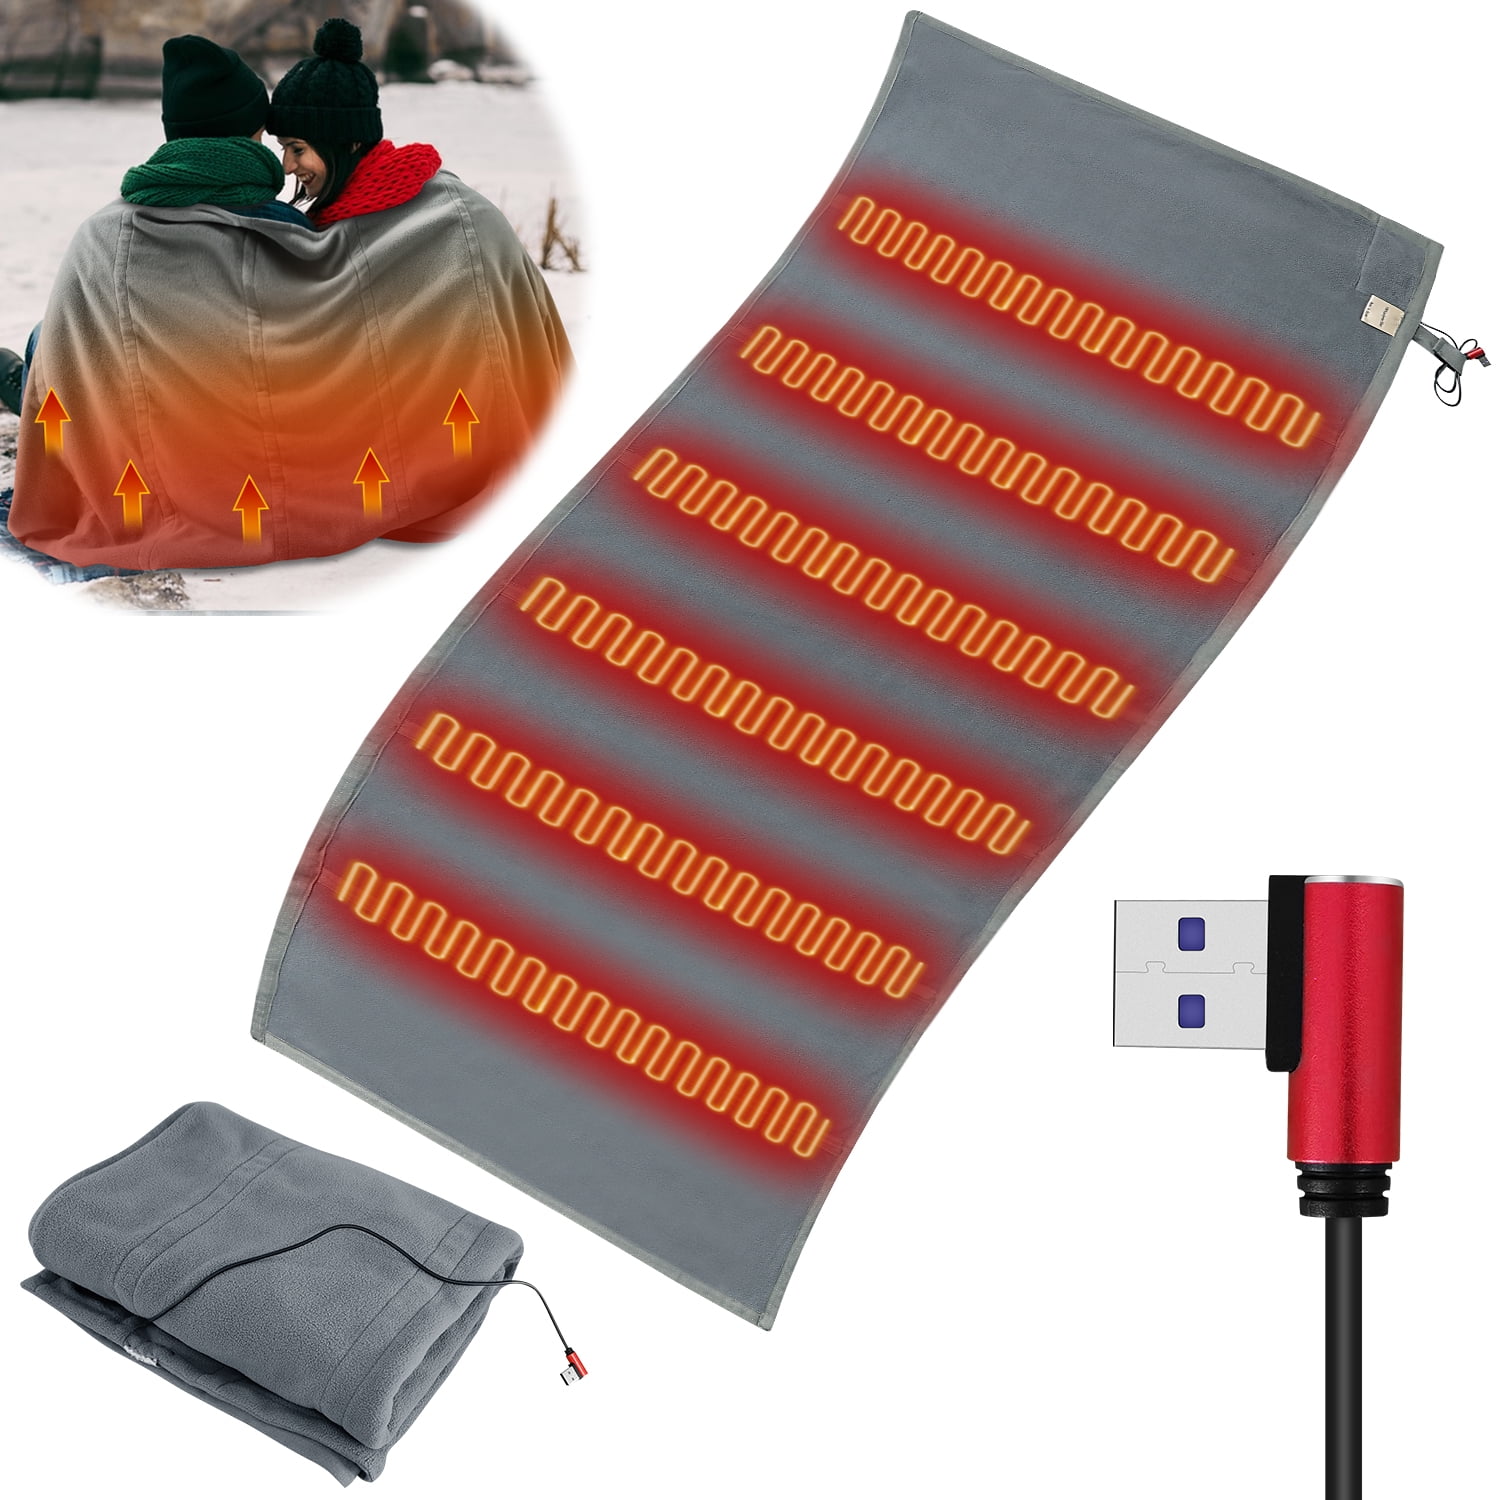 Electric Blanket Heated Throw Cordless Heating Pad Portable USB